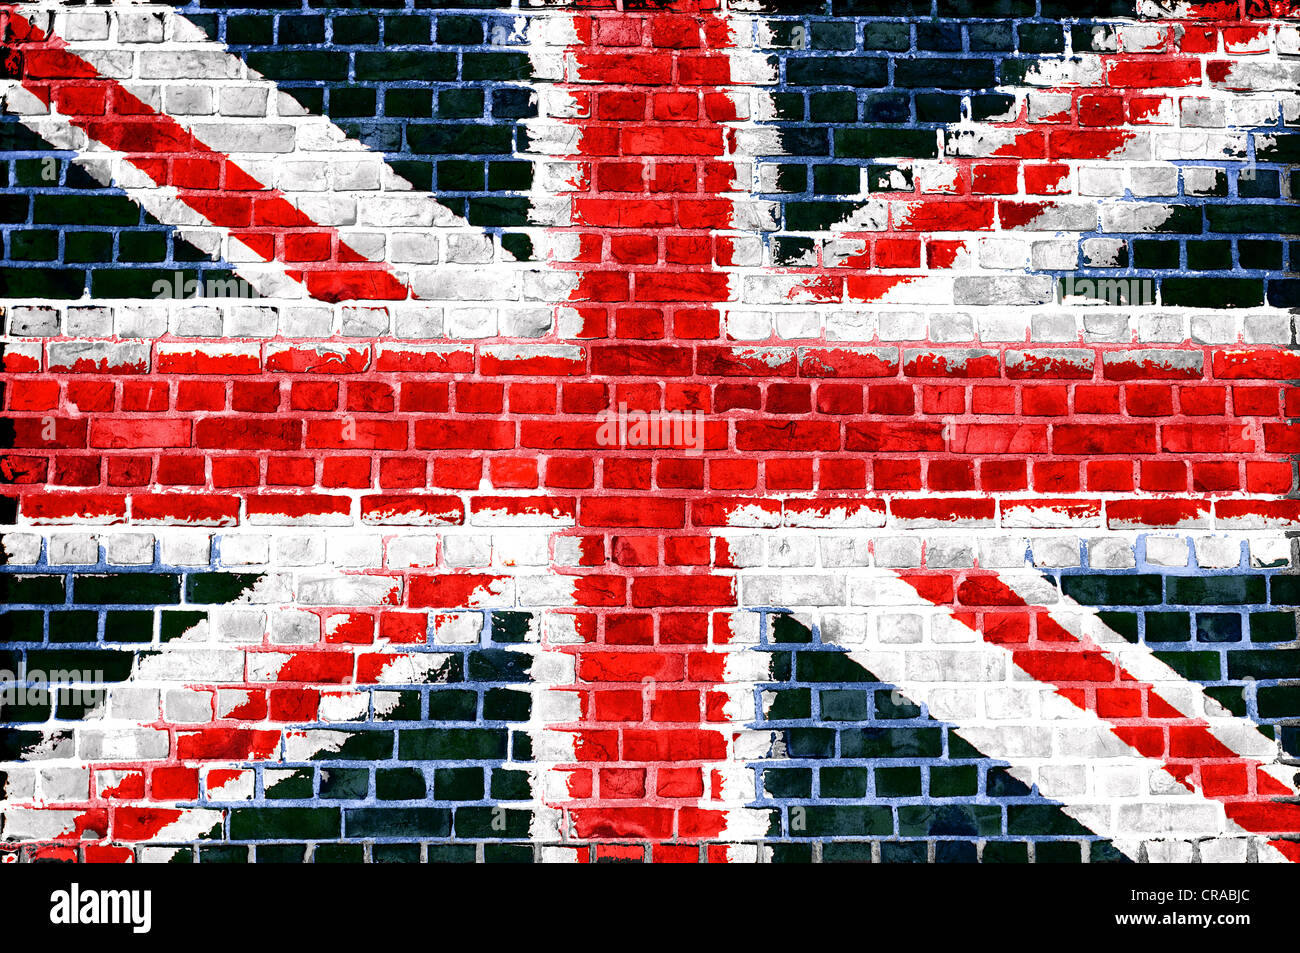 An image of the union jag flag painted on a brick wall in an urban location Stock Photo